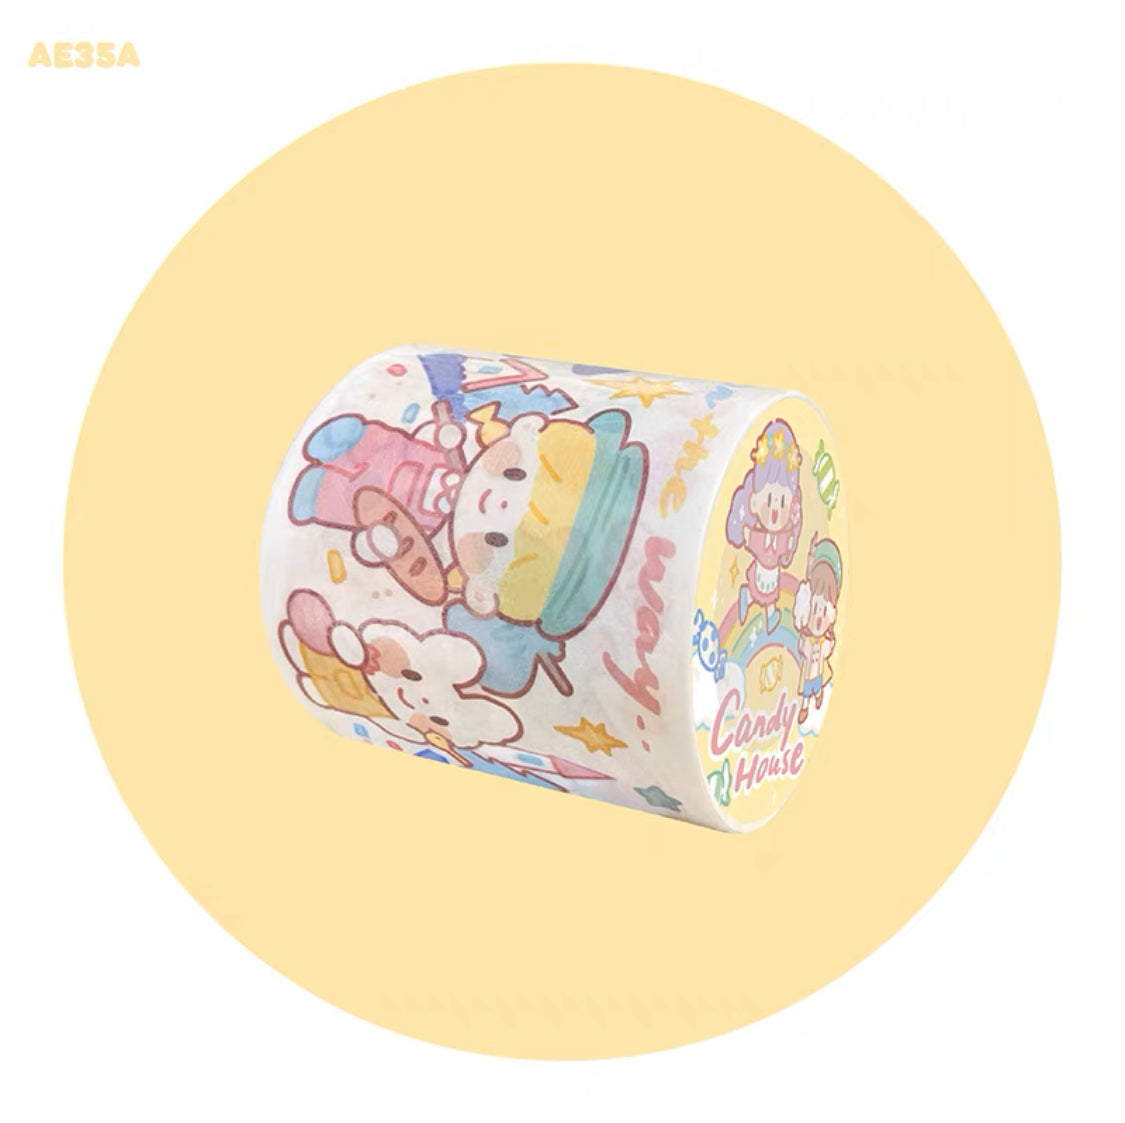 Molinta 「candy house」series washitape  sticker and journal paper pack